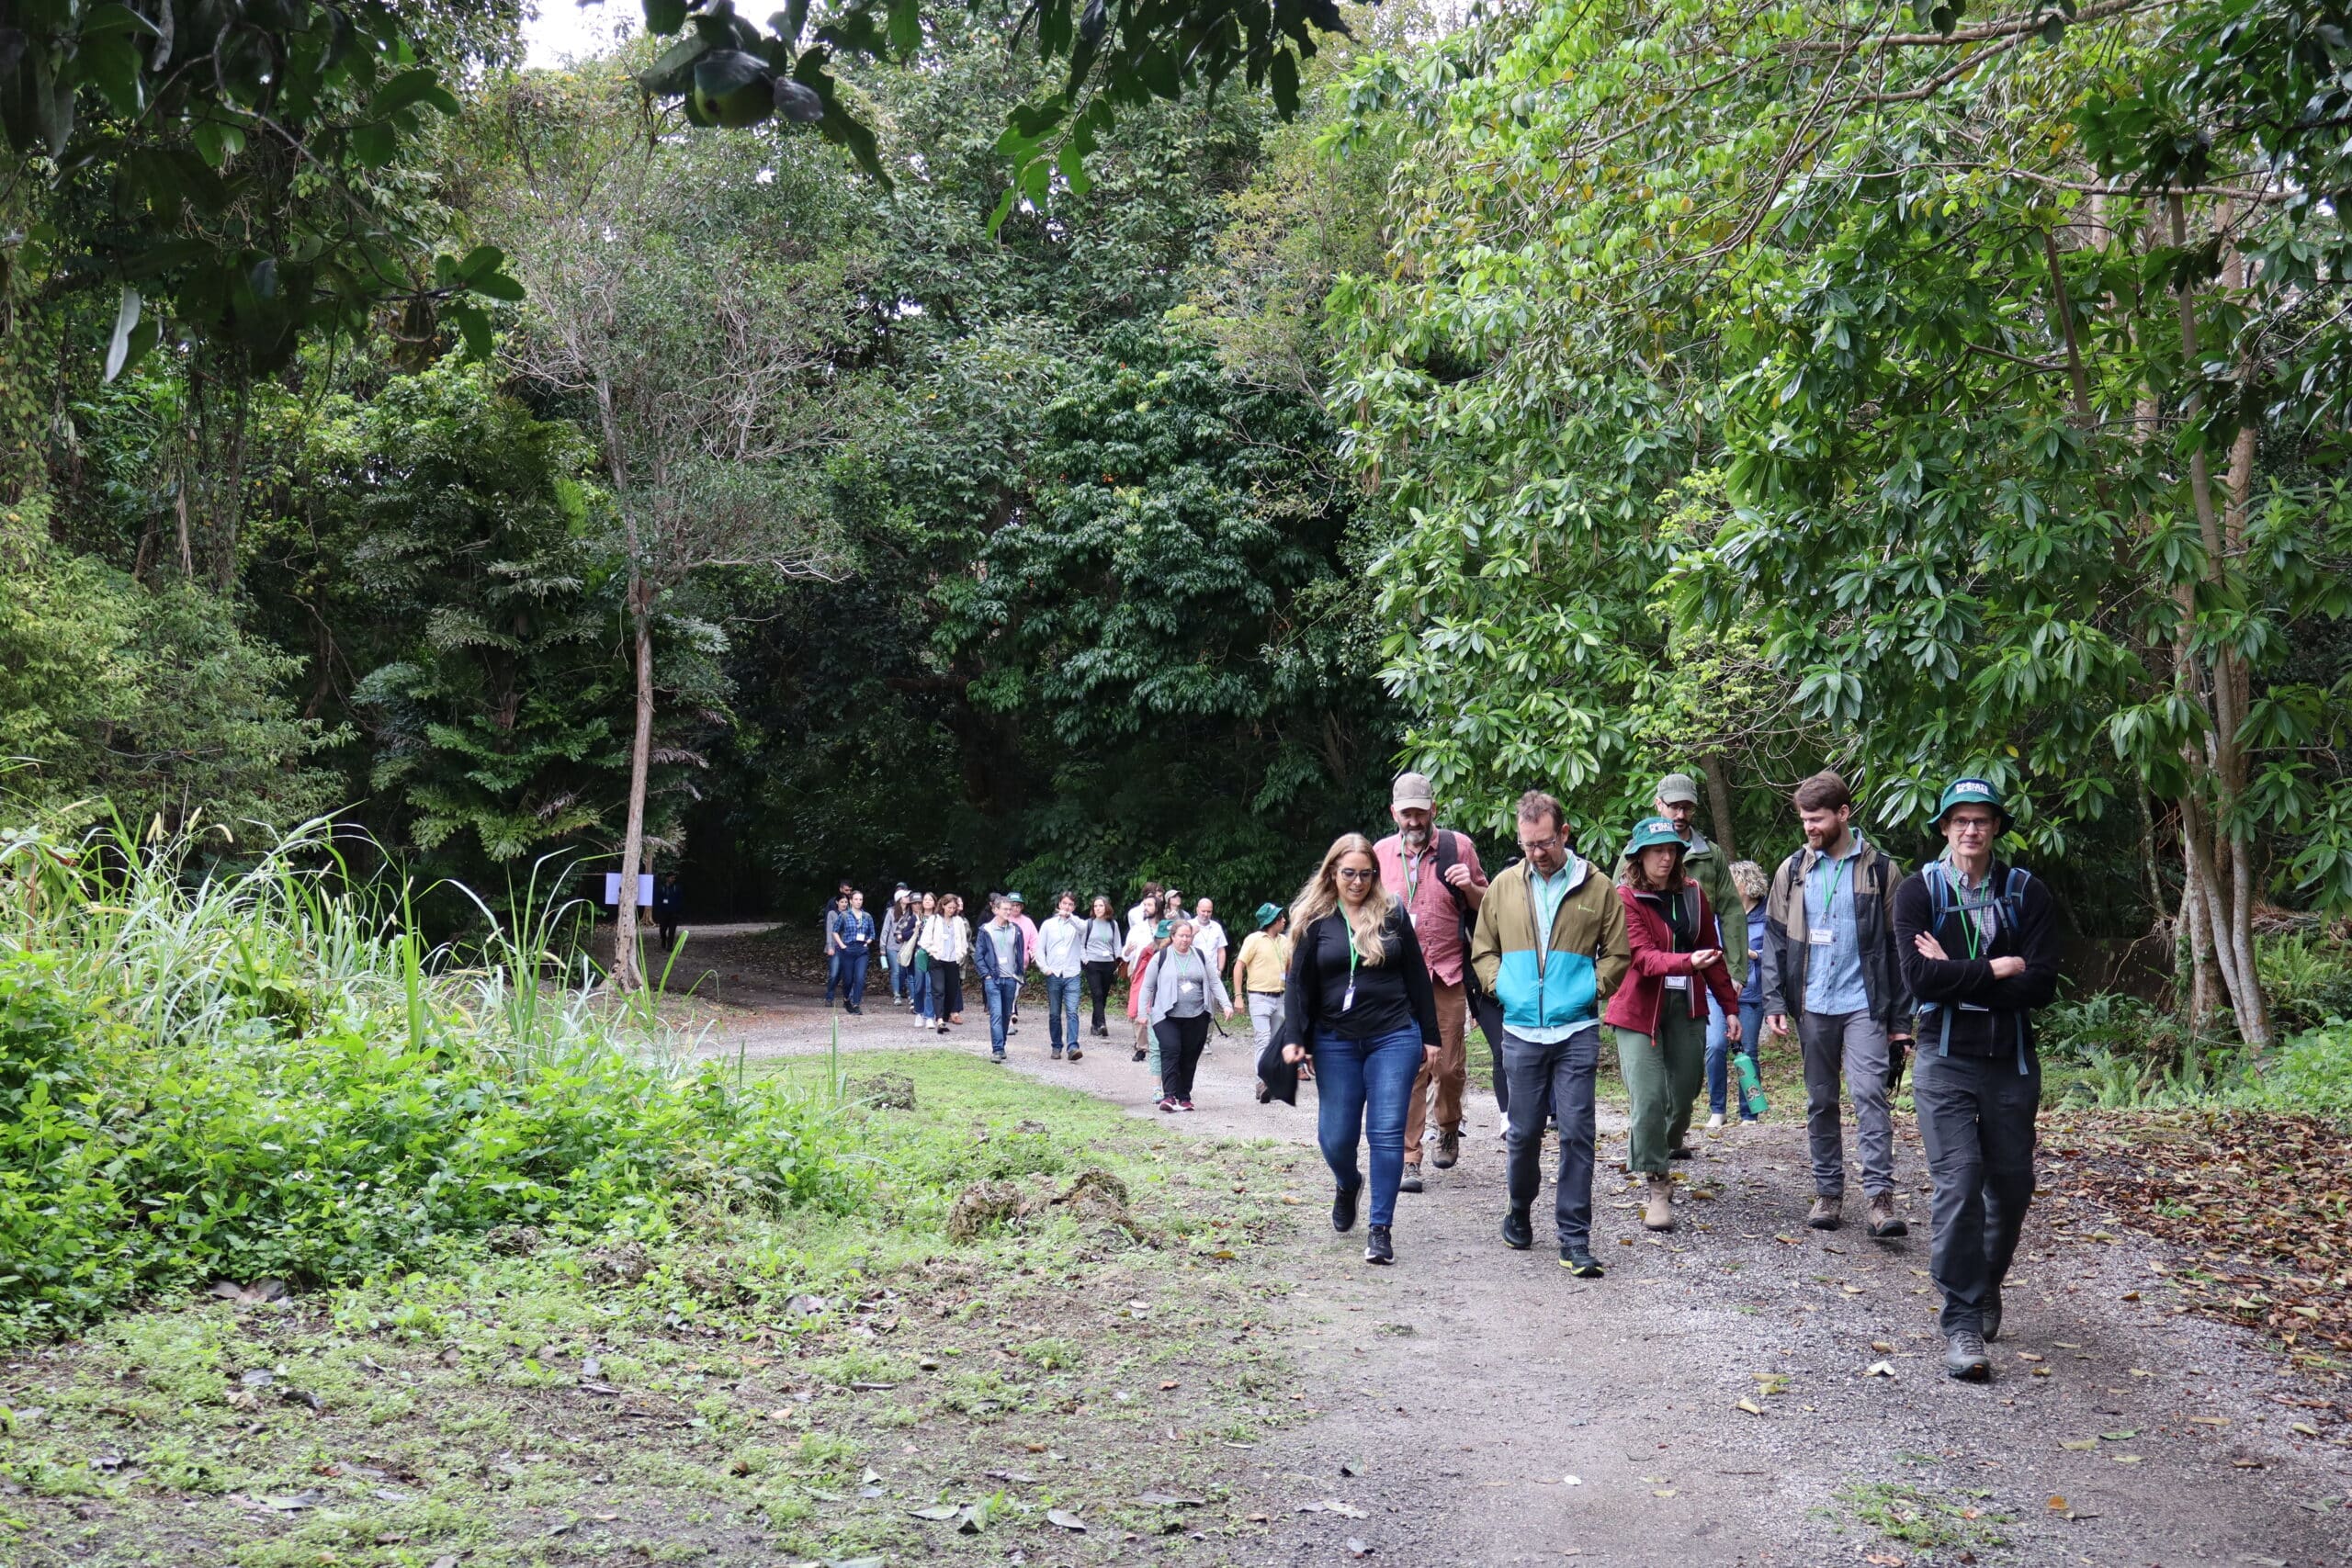 A large group of forests in cities members walk on a dirt path surrounded my trees in Miami